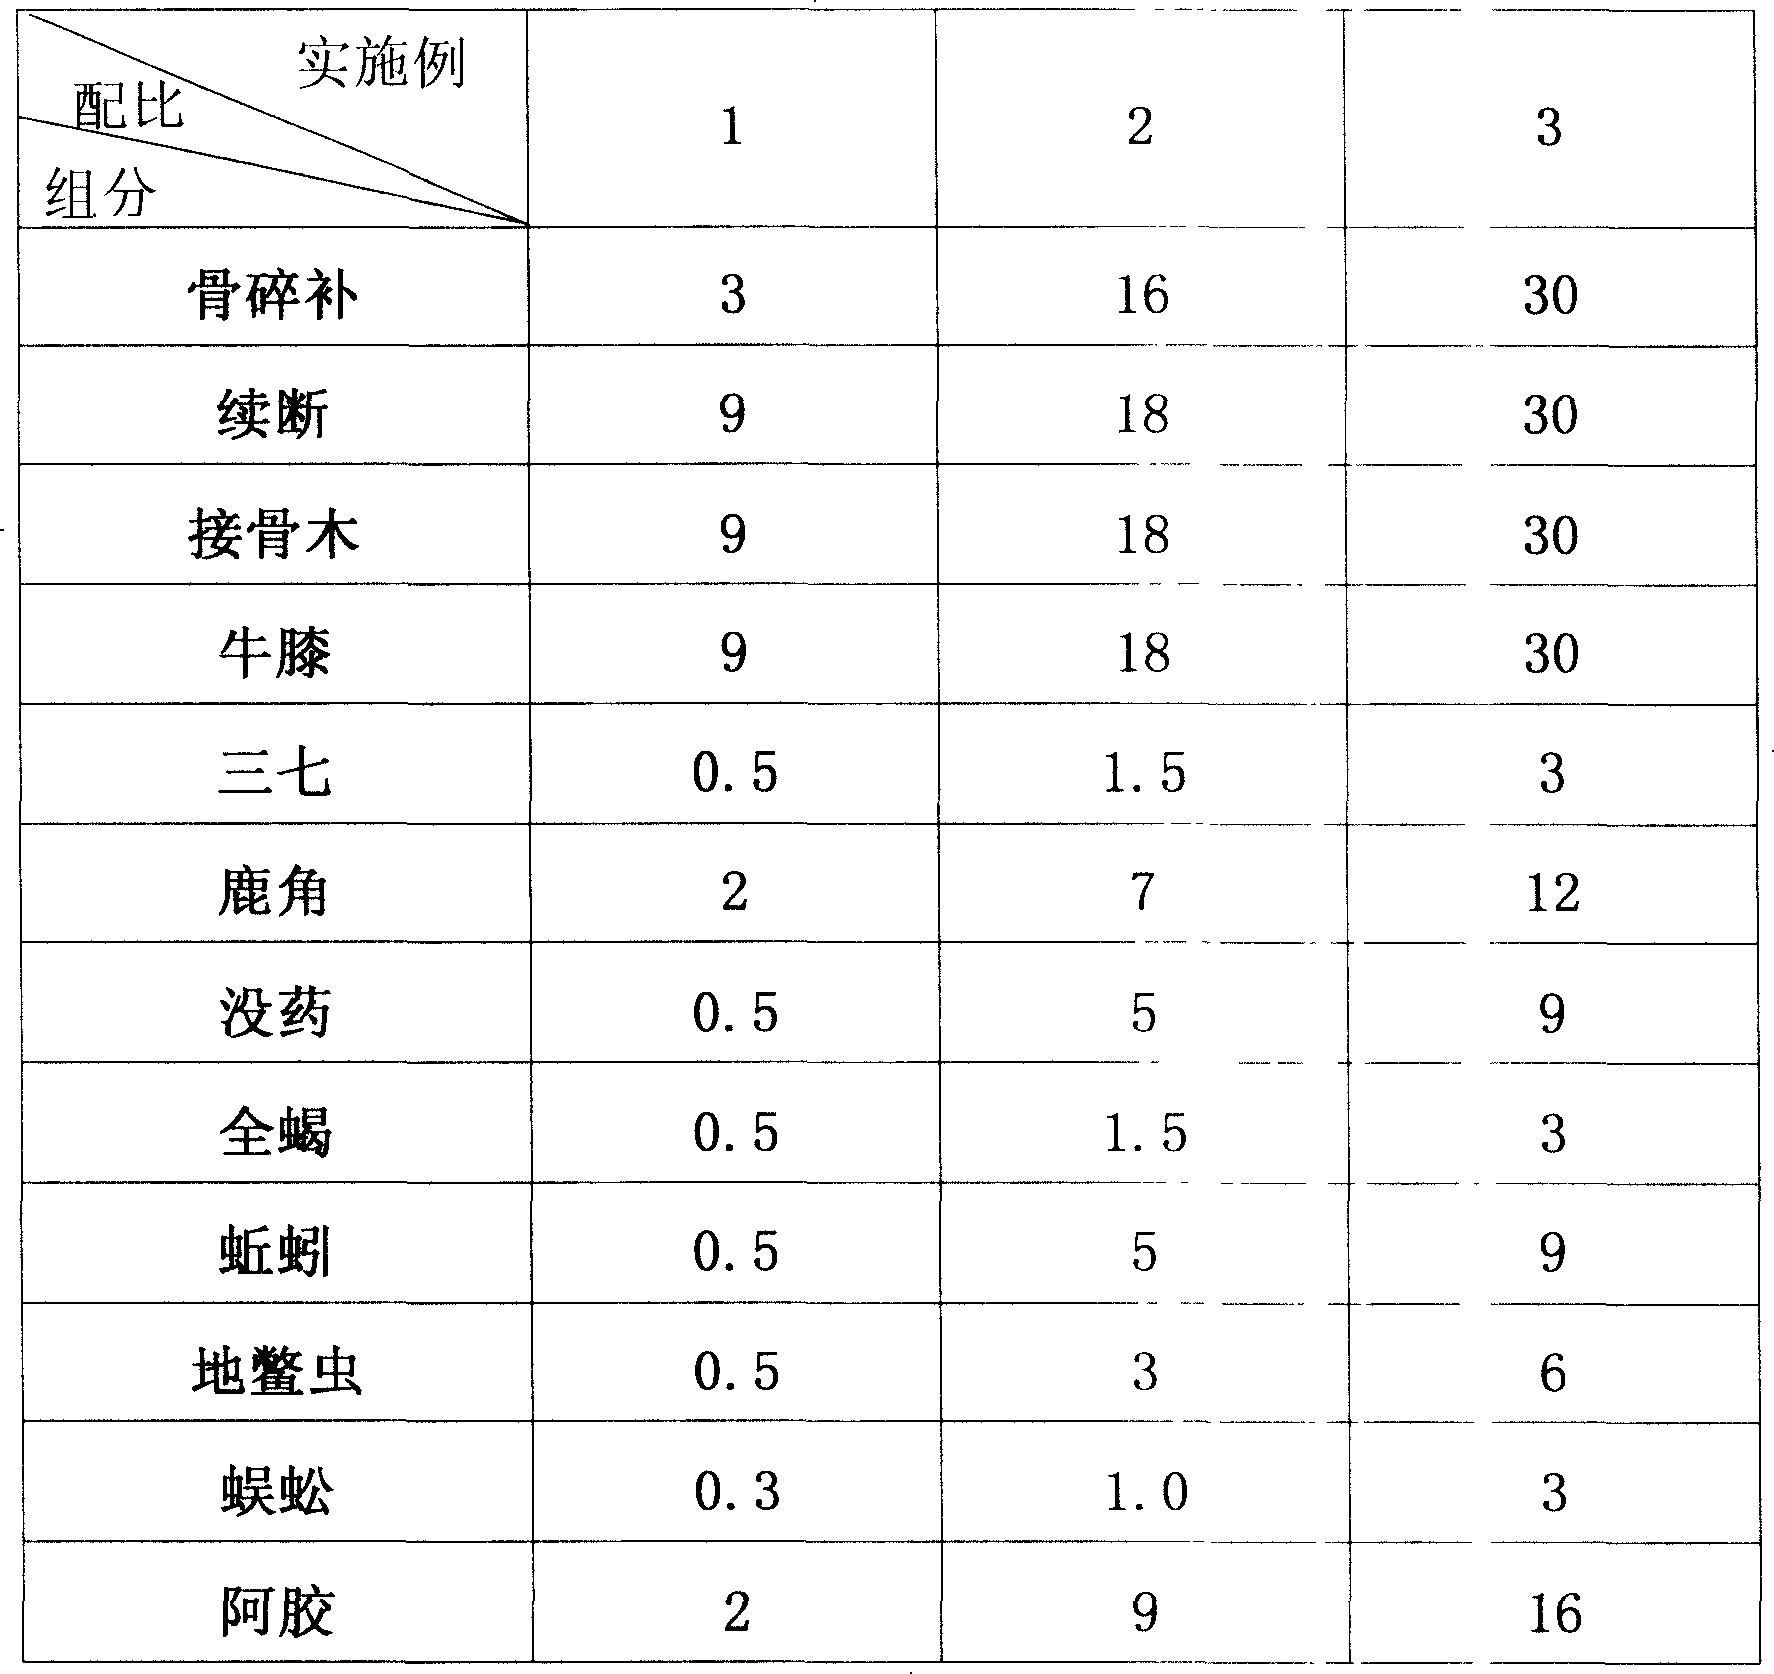 Traditional Chinese medicine capsule for treating aseptic necrosis of femur head